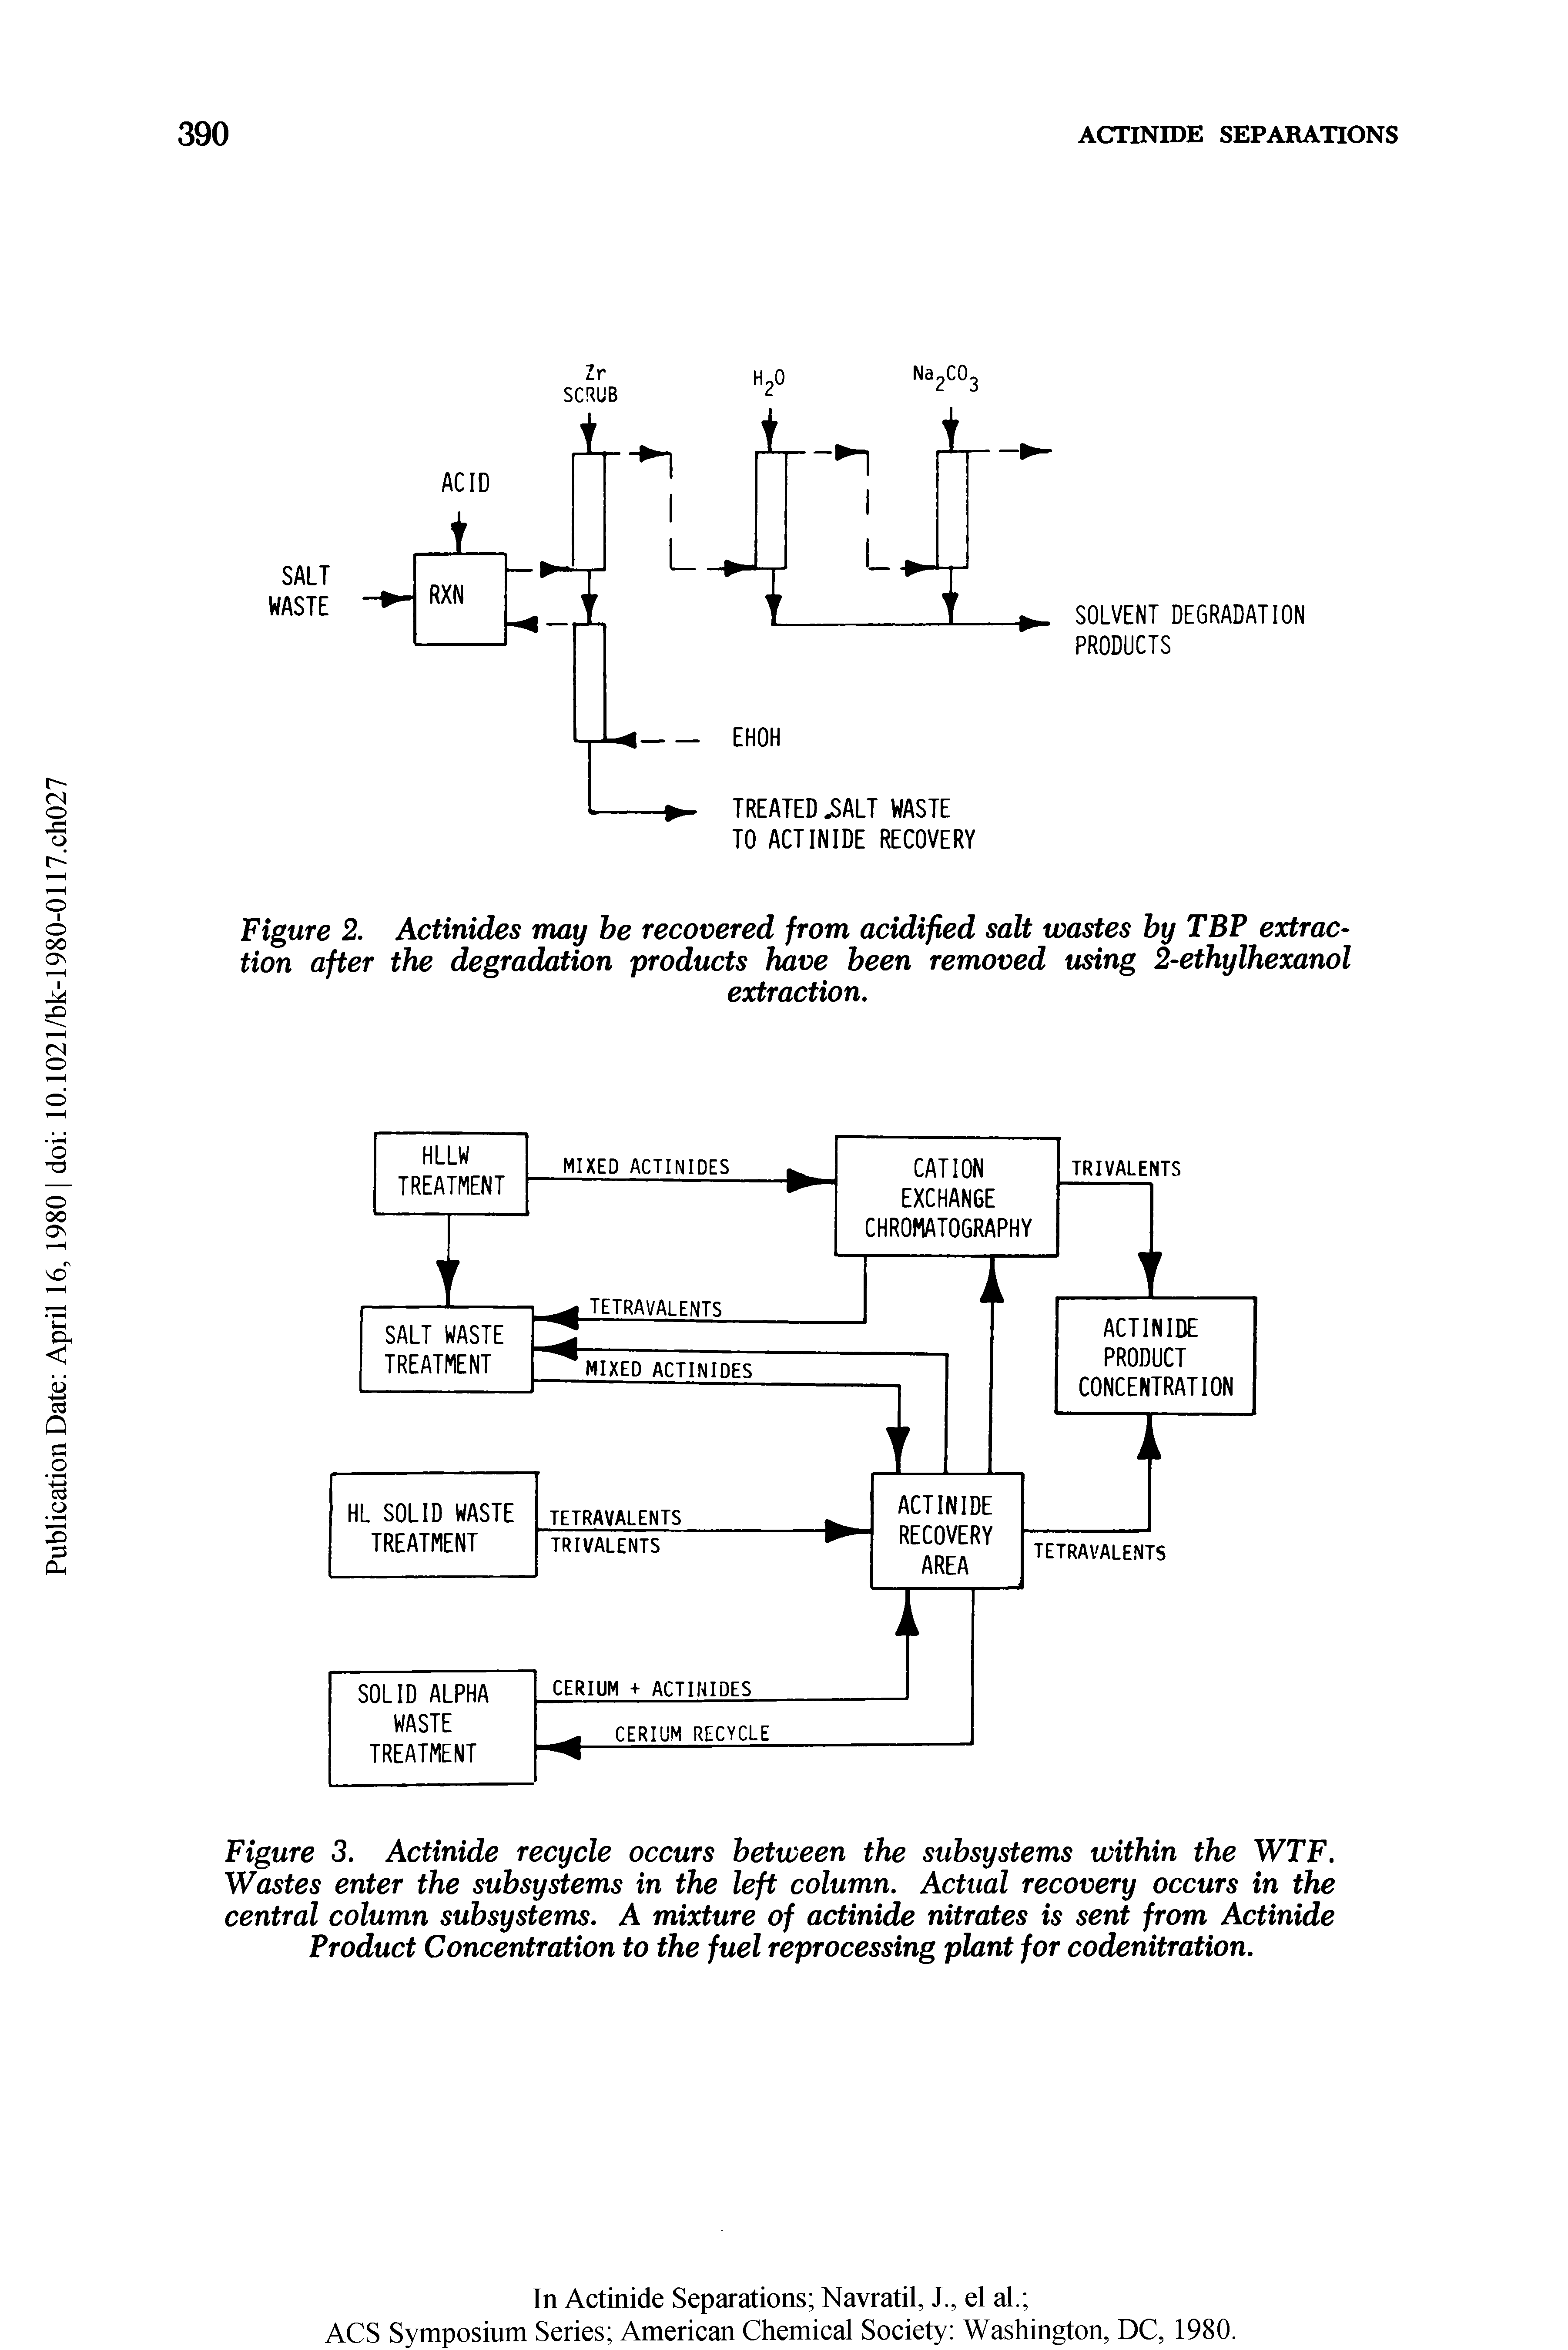 Figure 3. Actinide recycle occurs between the subsystems within the WTF. Wastes enter the subsystems in the left column. Actual recovery occurs in the central column subsystems. A mixture of actinide nitrates is sent from Actinide Product Concentration to the fuel reprocessing plant for codenitration.